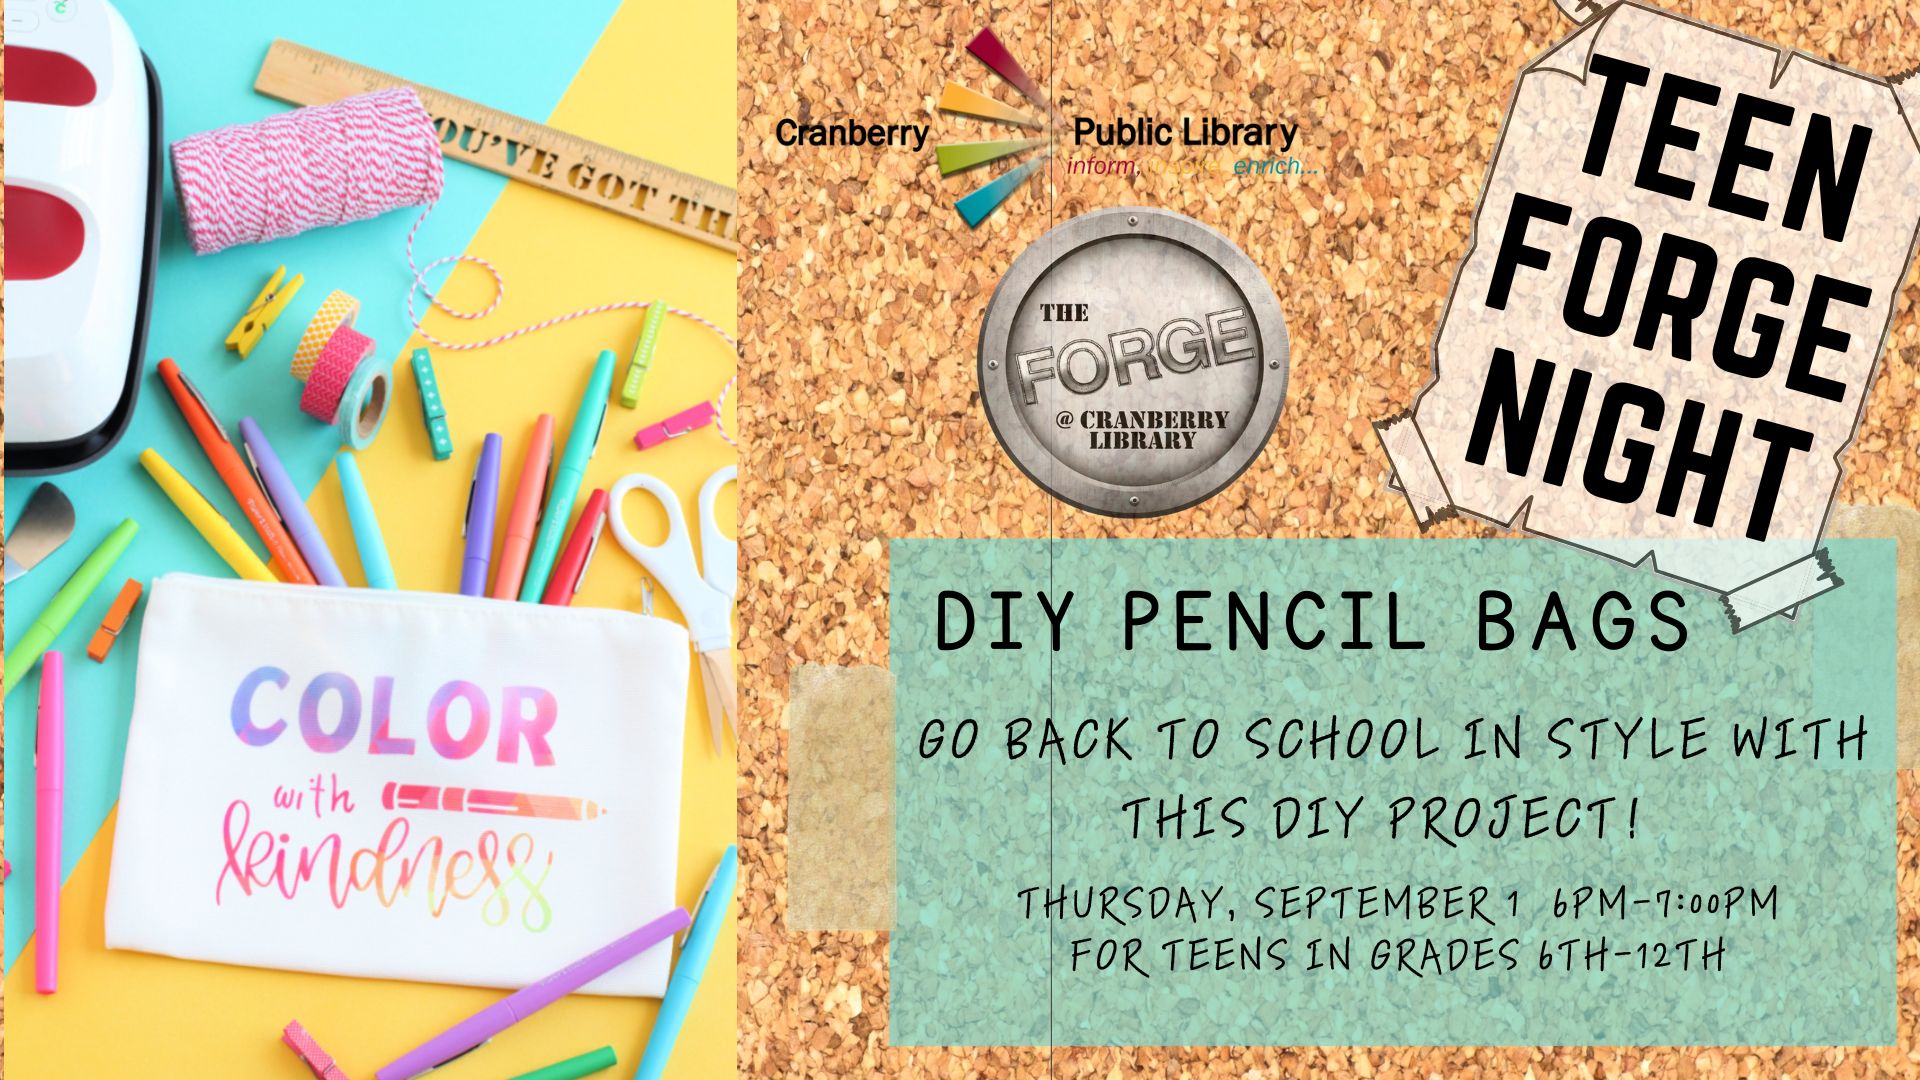 Flyer for Teen Forge Night DIY Pencil Cases